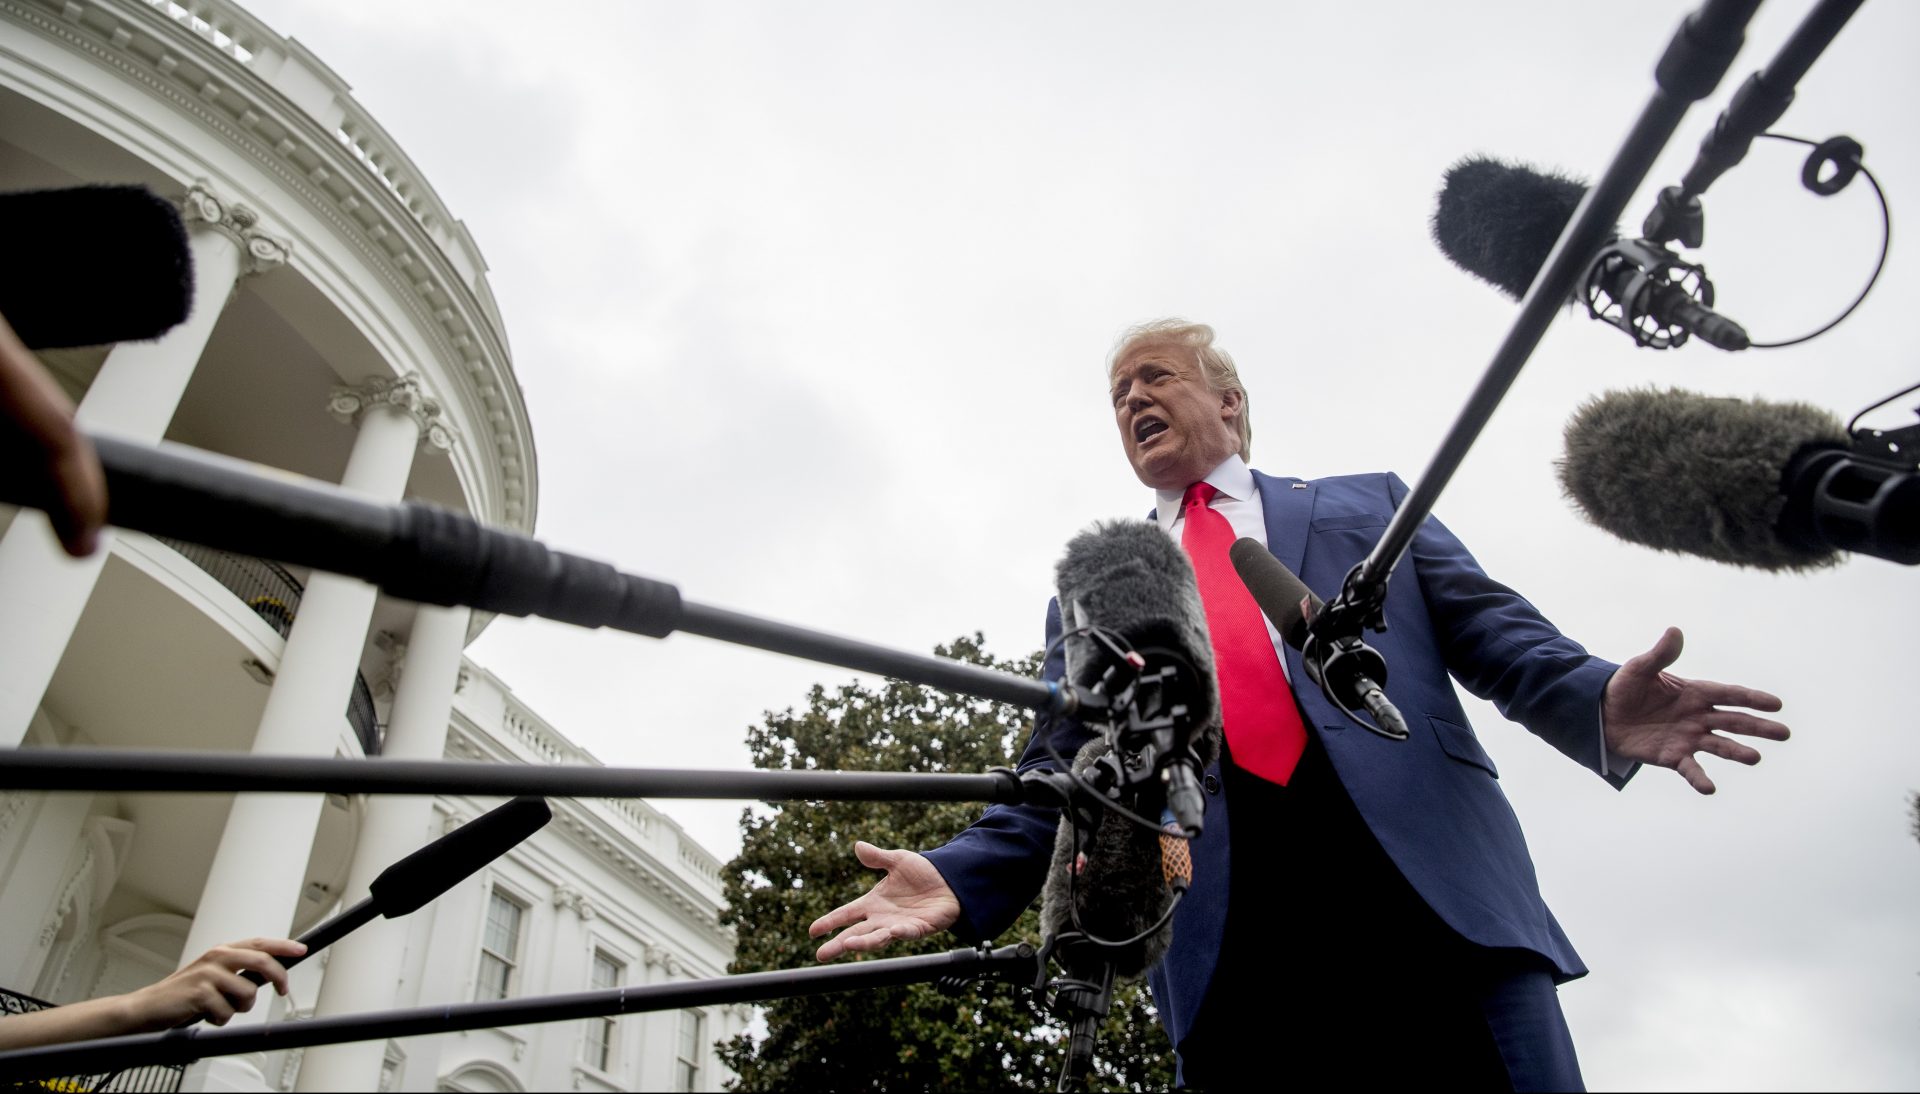 President Donald Trump speaks to the media on the South Lawn of the White House in Washington, Thursday, Oct. 3, 2019, before boarding Marine One for a short trip to Andrews Air Force Base, Md., and then on to Florida.